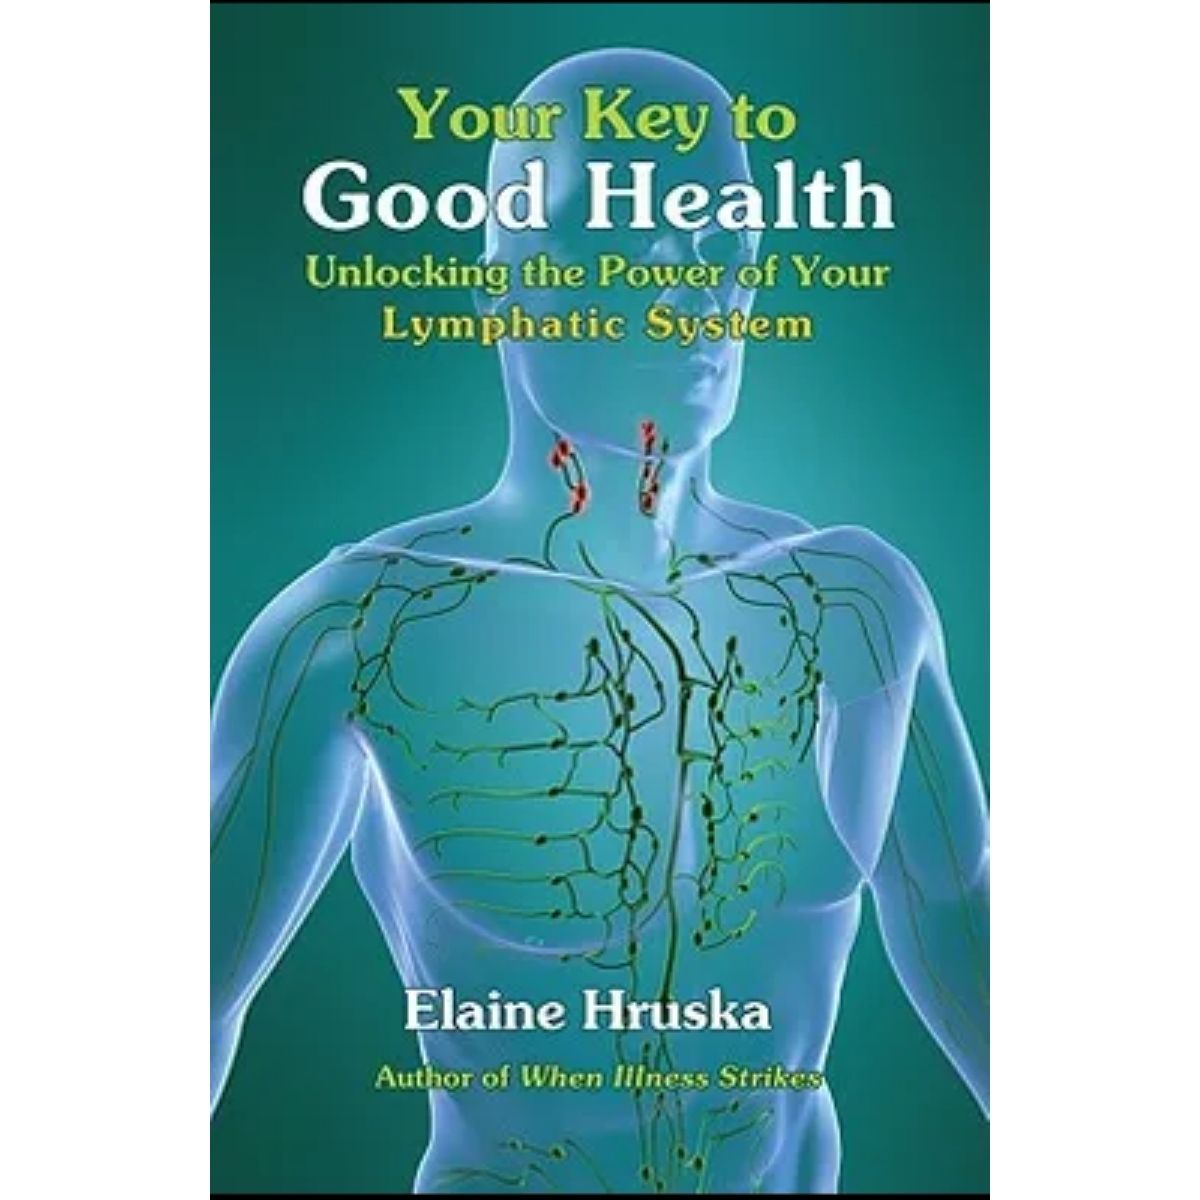 Your Key to Good Health, Unlocking the Power of Your Lymphatic System